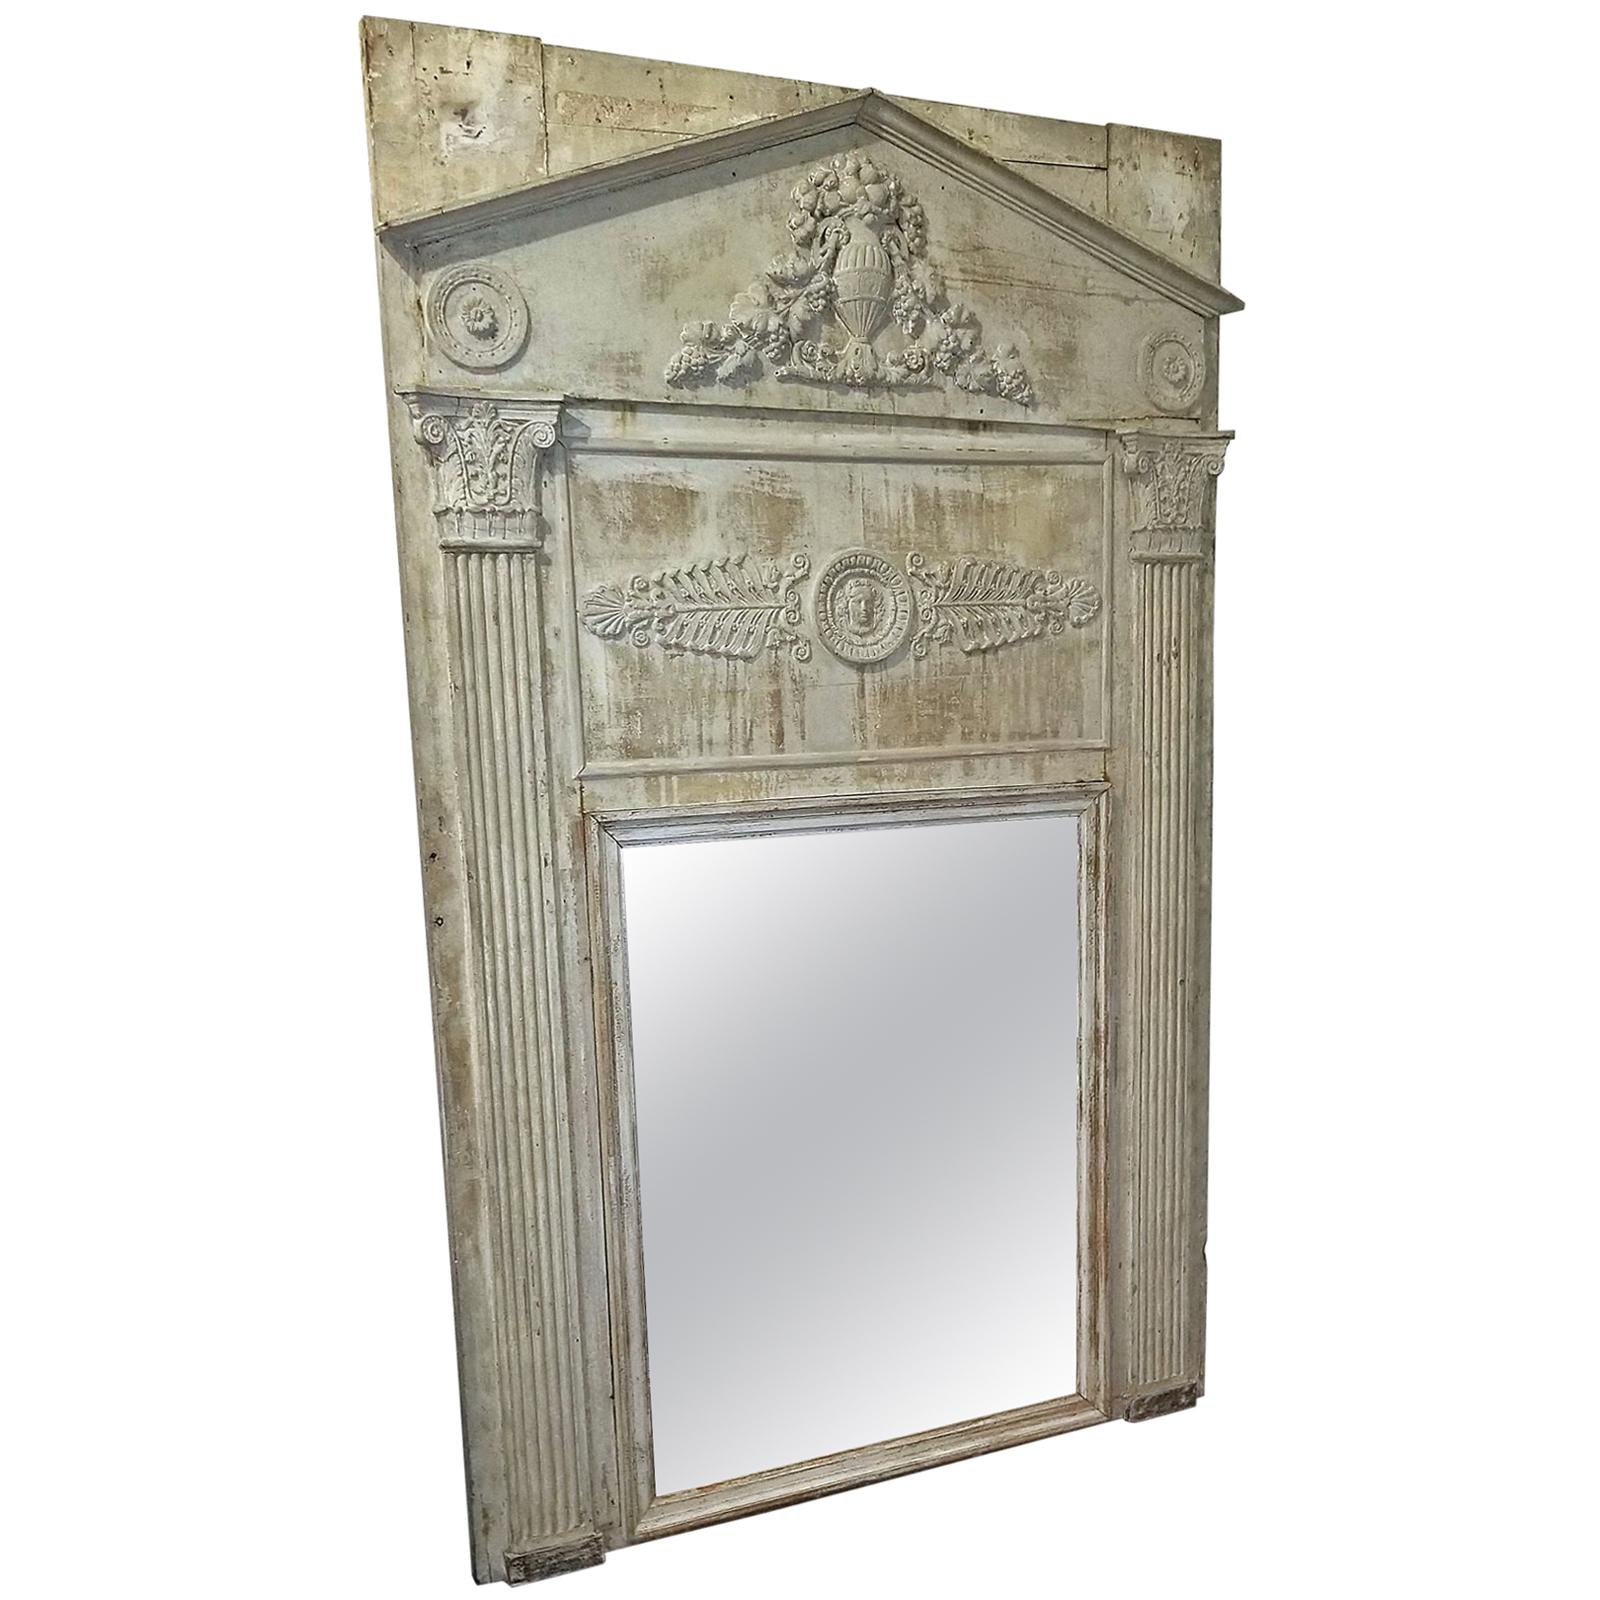 Large 19th Century French Neoclassical Revival Trumeau Mirror